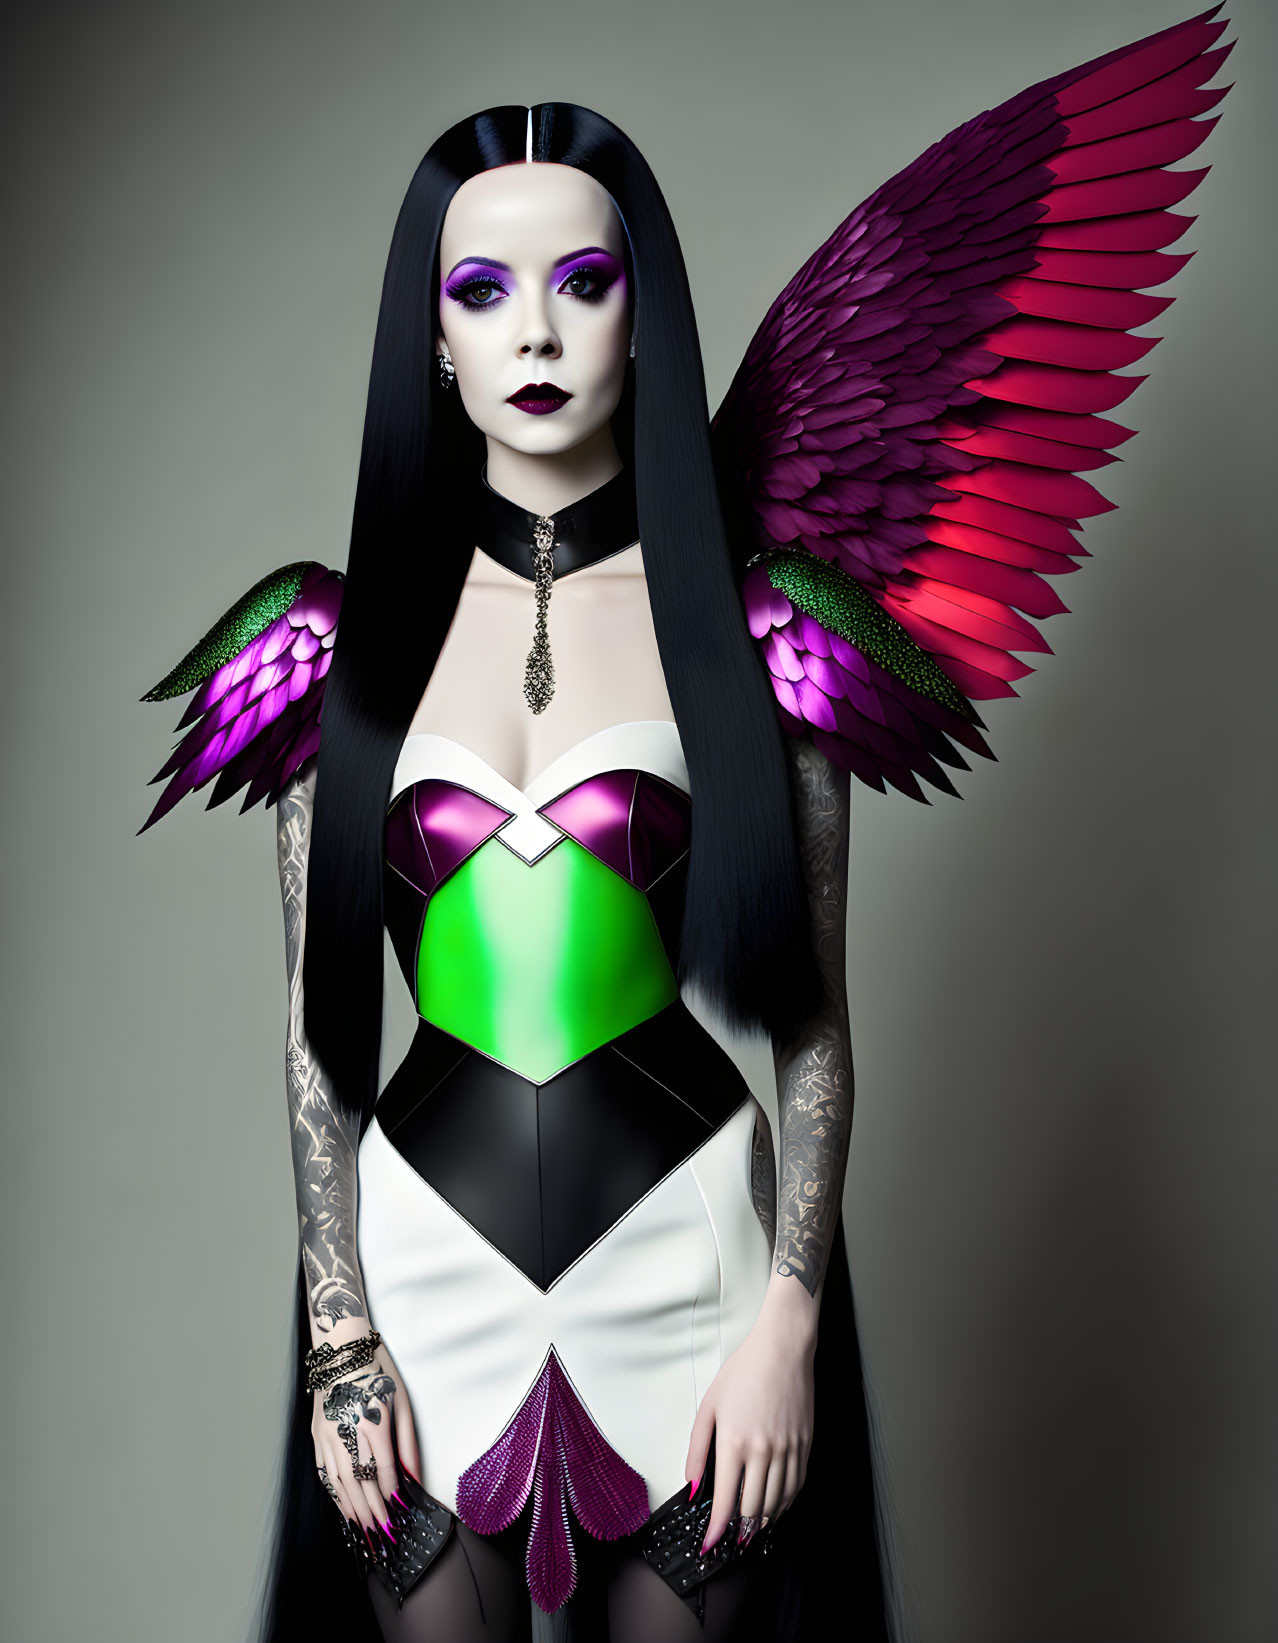 Woman with Long Black Hair and Bird Wings in Geometric Bodysuit